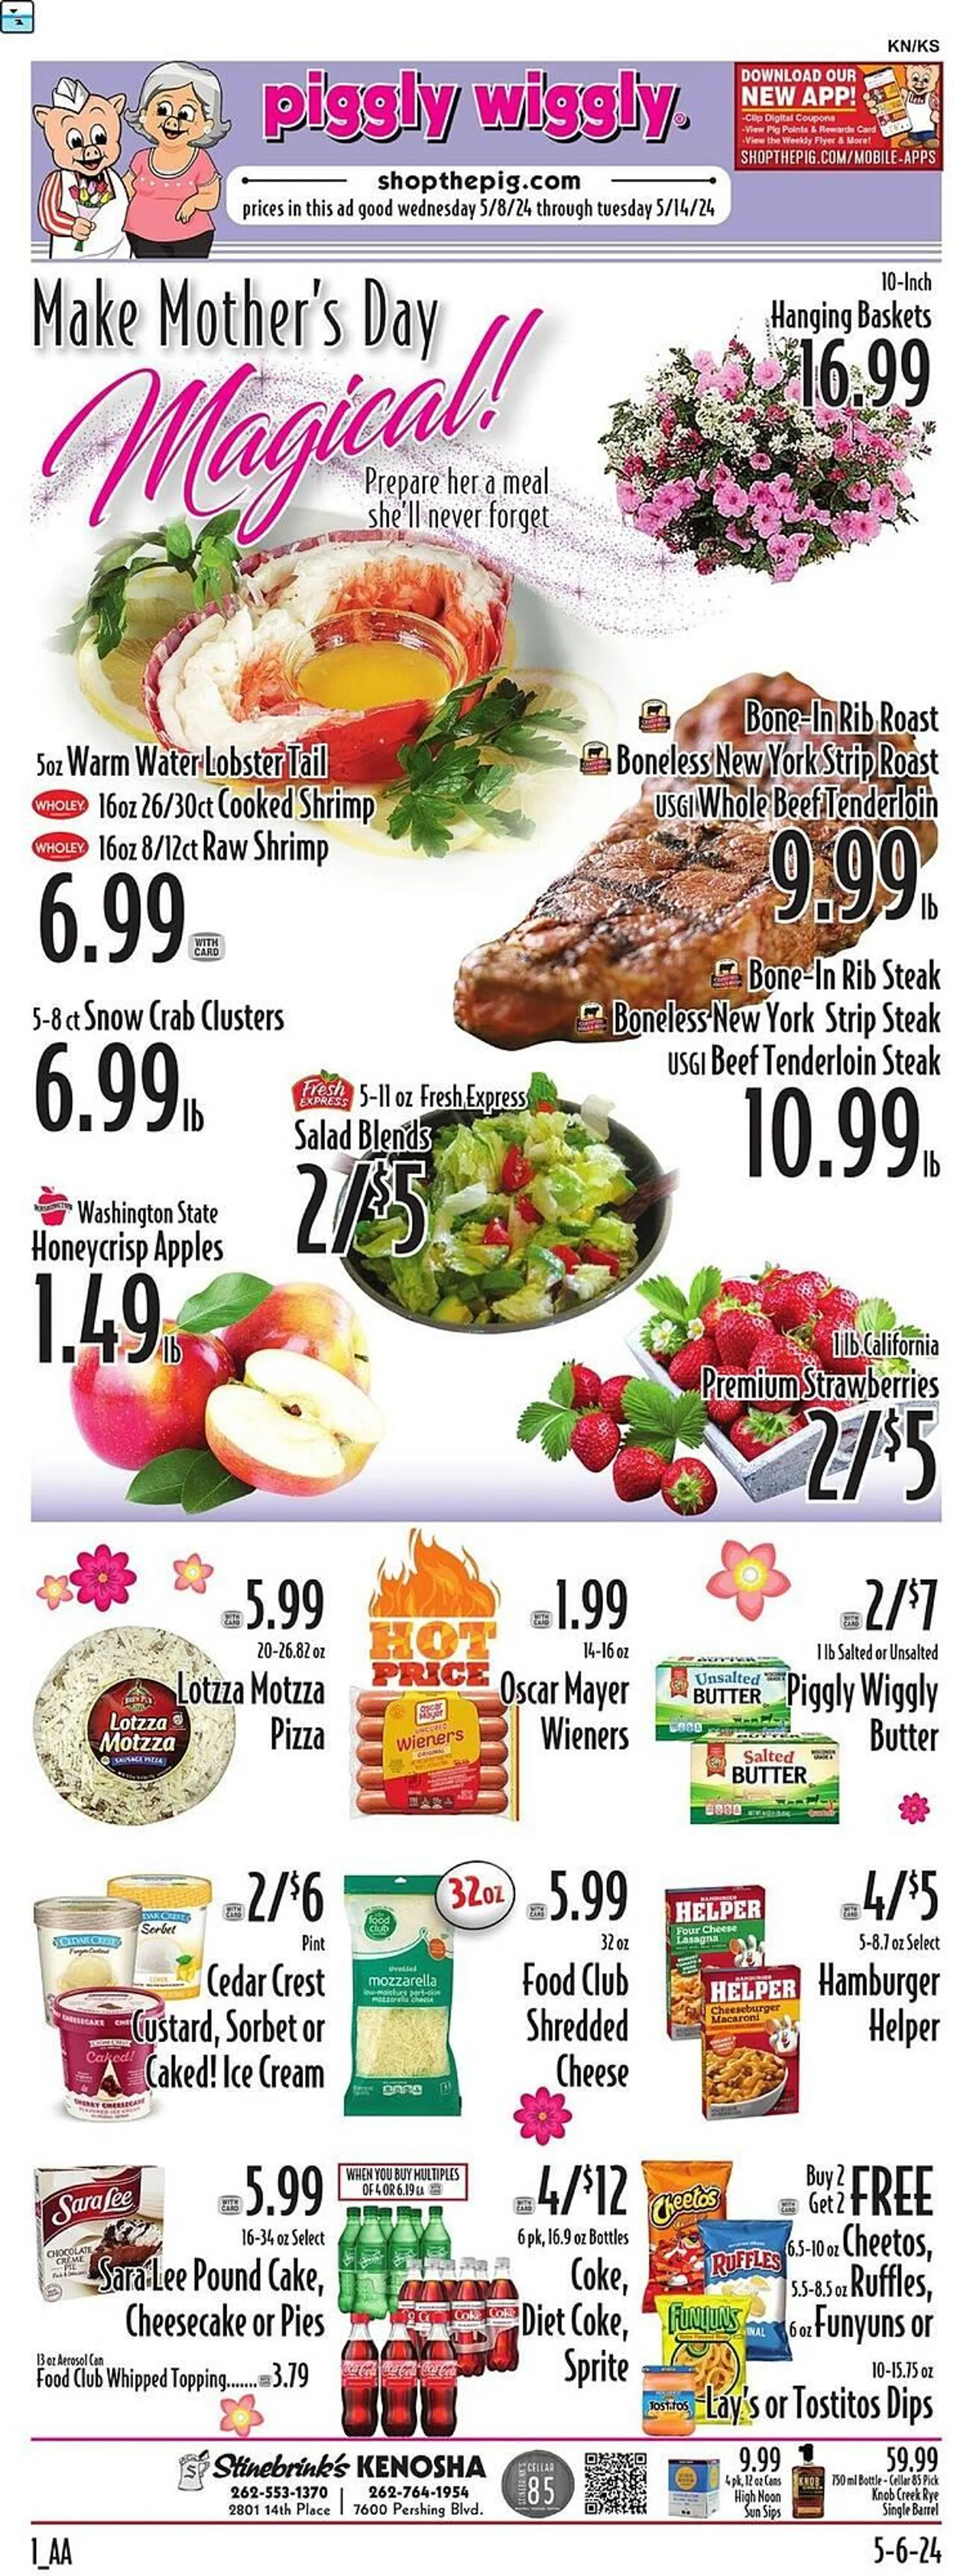 Piggly Wiggly Weekly Ad - 1